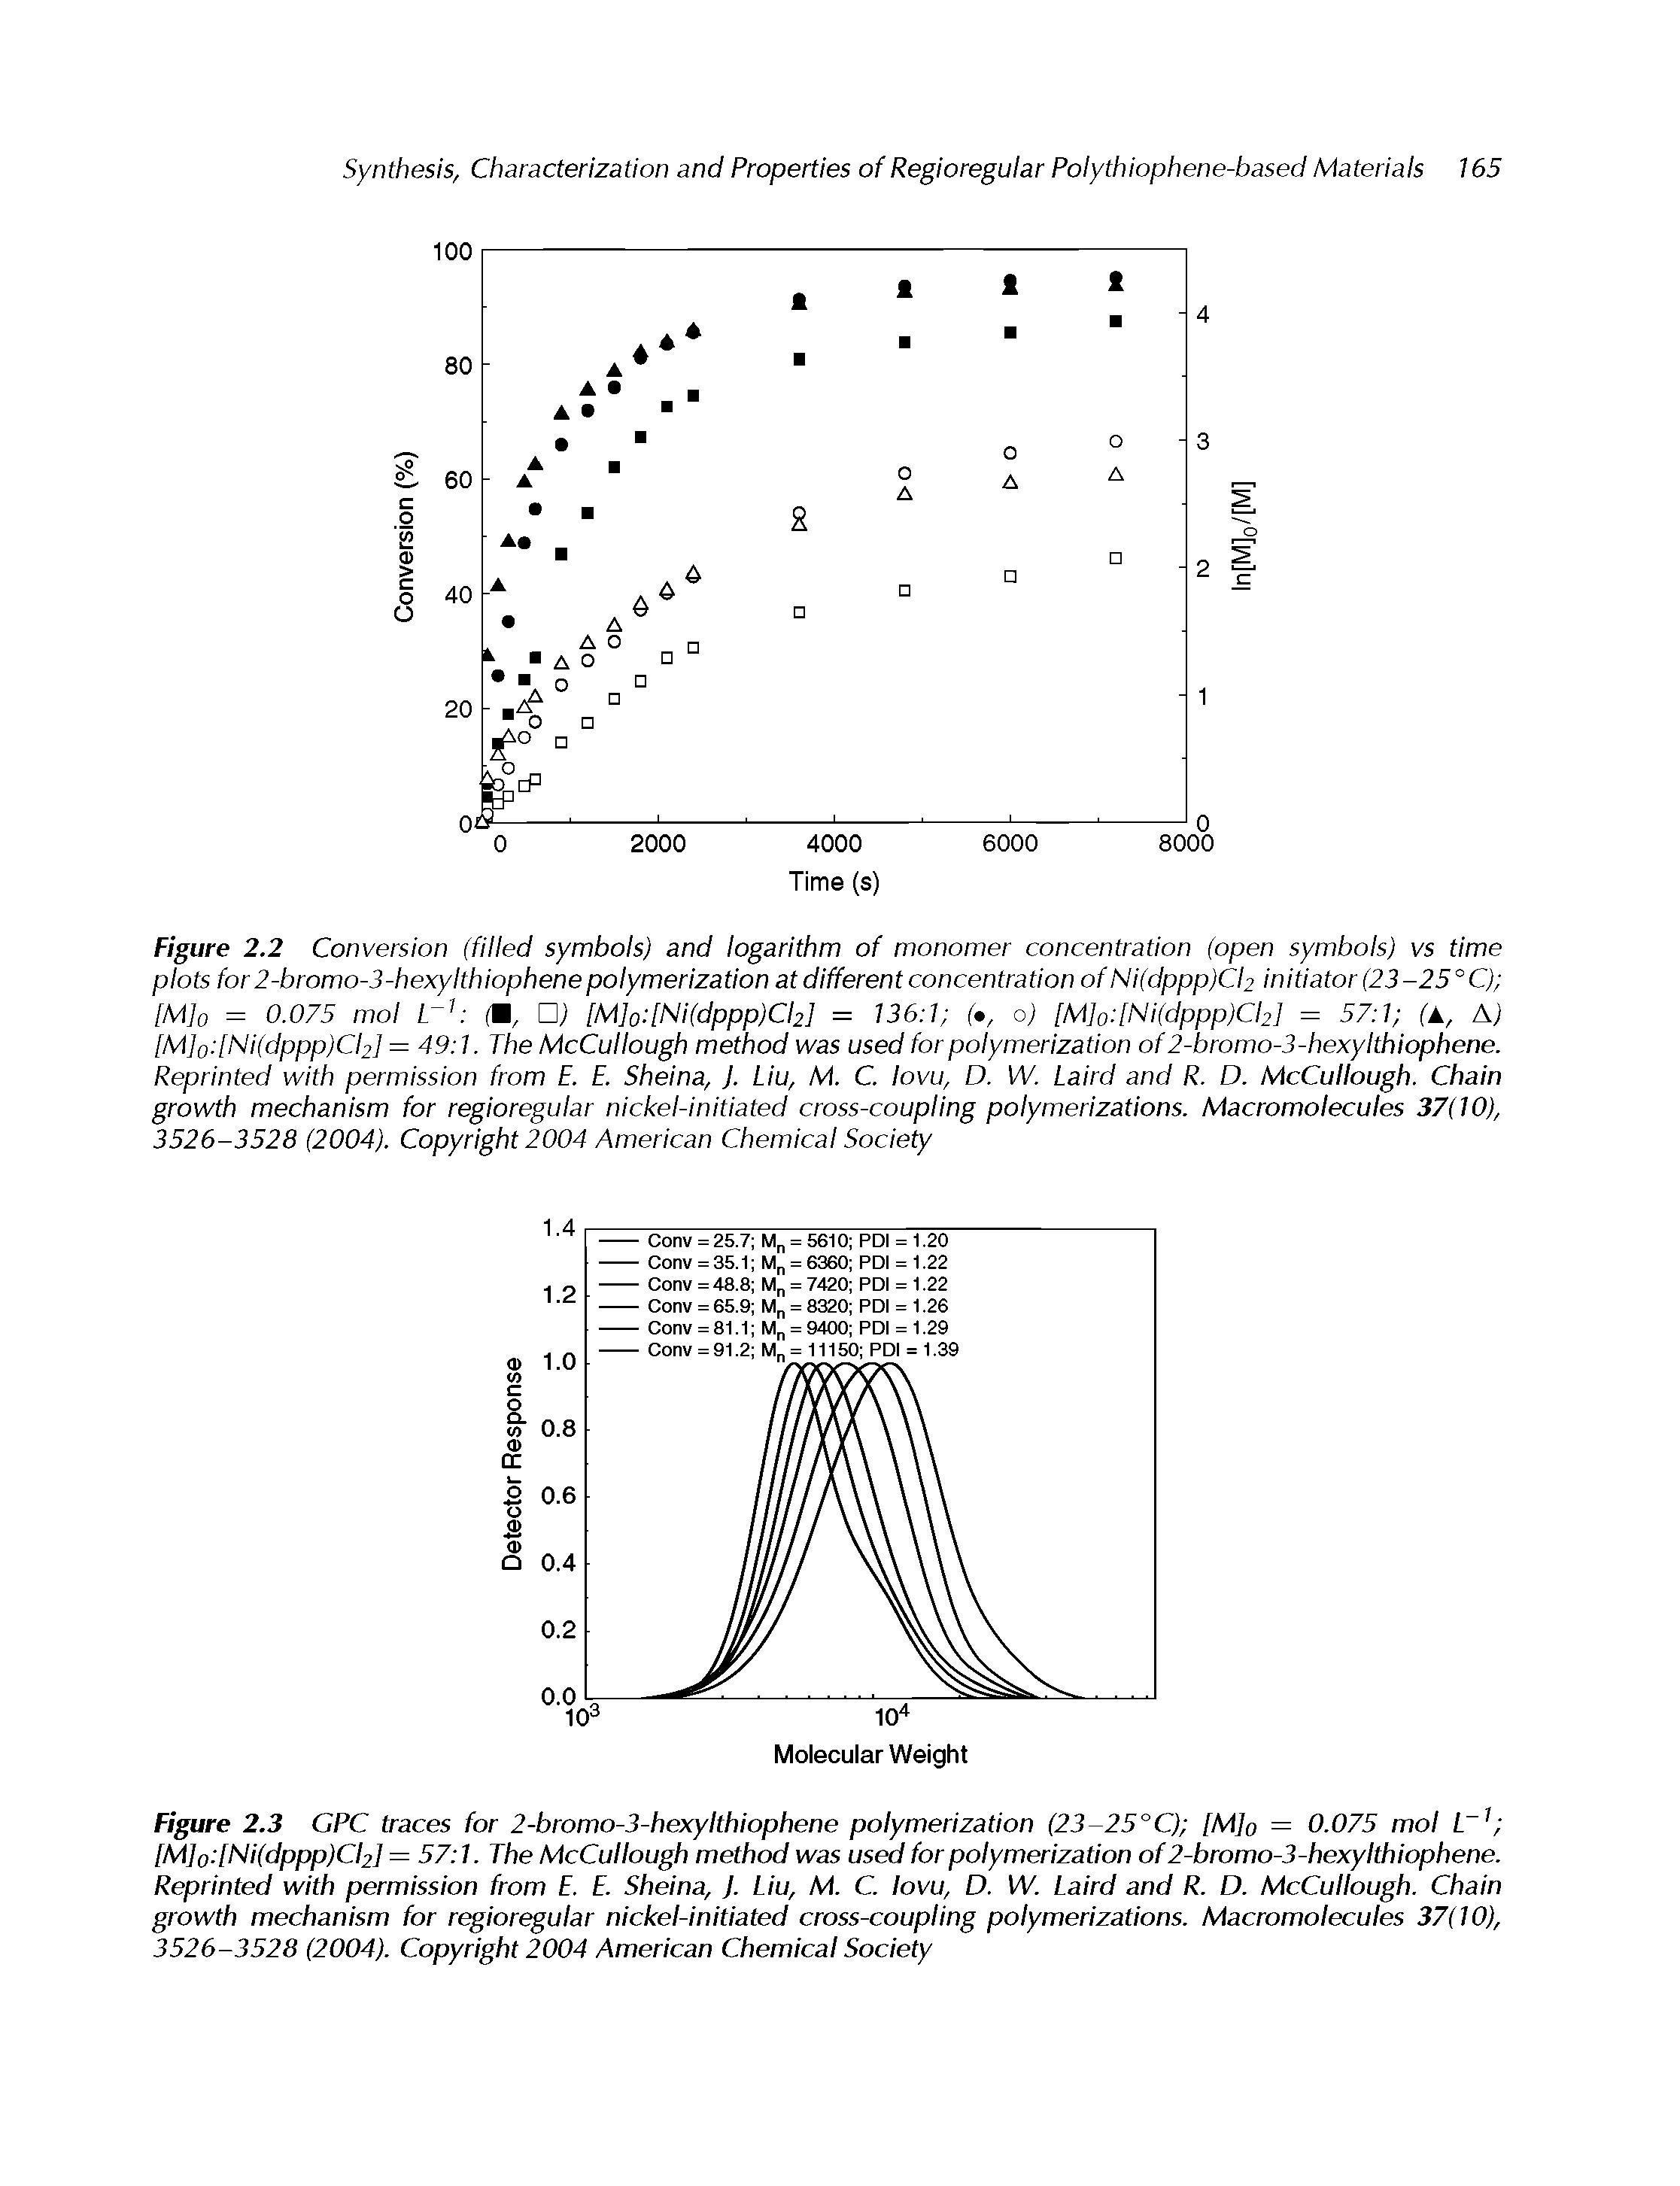 Figure 2.3 CPC traces for 2-bromo-3-hexylthiophene polymerization (23-25° C) [M]o = 0.075 mol L [M]o [Ni(dppp)Cl2] = 57 1. The McCullough method was used for polymerization of2-bromo-3-hexylthiophene. Reprinted with permission from E. E. Sheina, J. Liu, M. C. lovu, D. W. Laird and R. D. McCullough. Chain growth mechanism for regioregular nickel-initiated cross-coupling polymerizations. Macromolecules 37(10), 3526-3528 (2004). Copyright 2004 American Chemical Society...